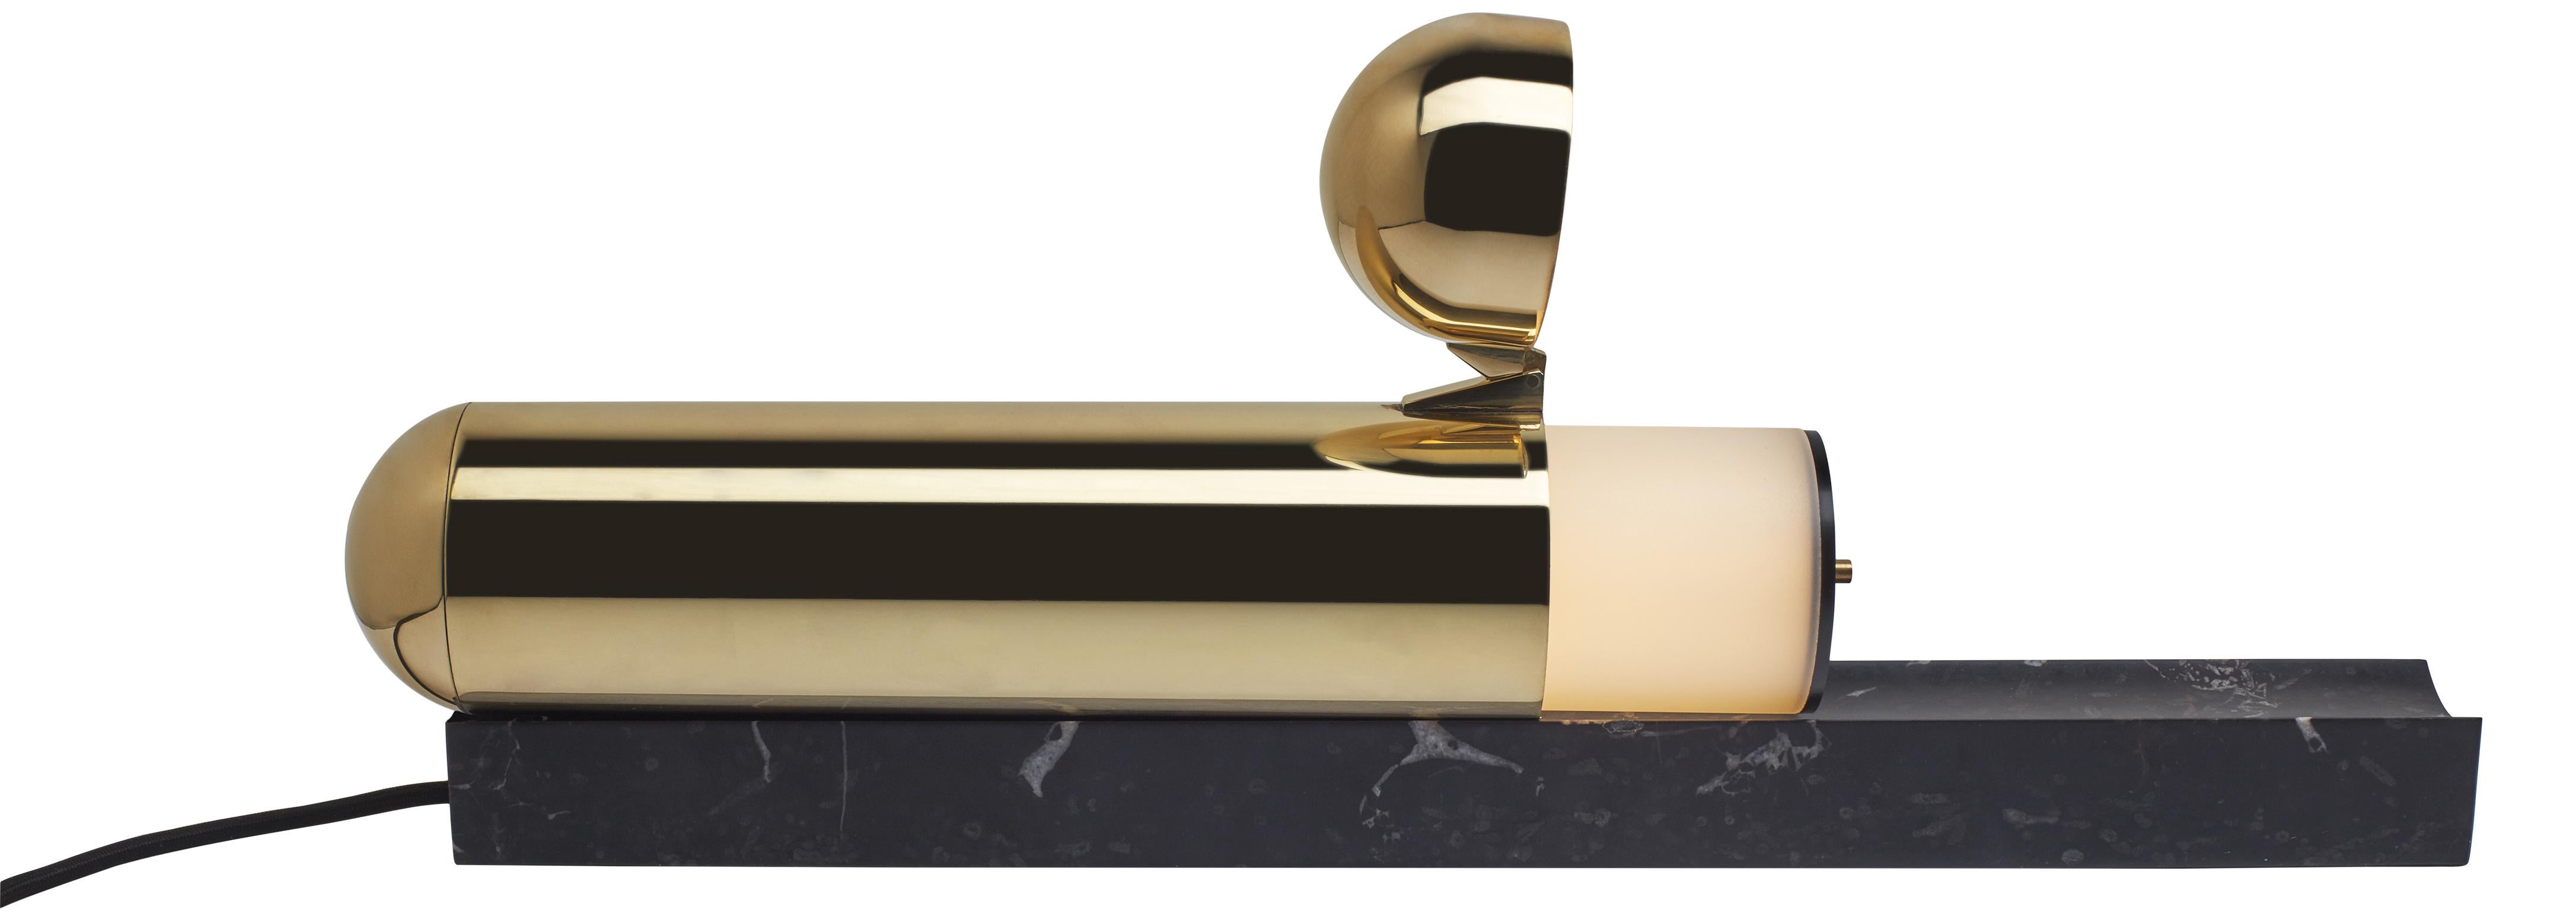 DCW Editions ISP Table Lamp in Brass with Black Marble by Ilia Sergeevich Potemine
 
 What is it ? A mystery ? An object from outer space ? From what period of history did it emerge? Which era ? Who could have invented such an object ? These are the